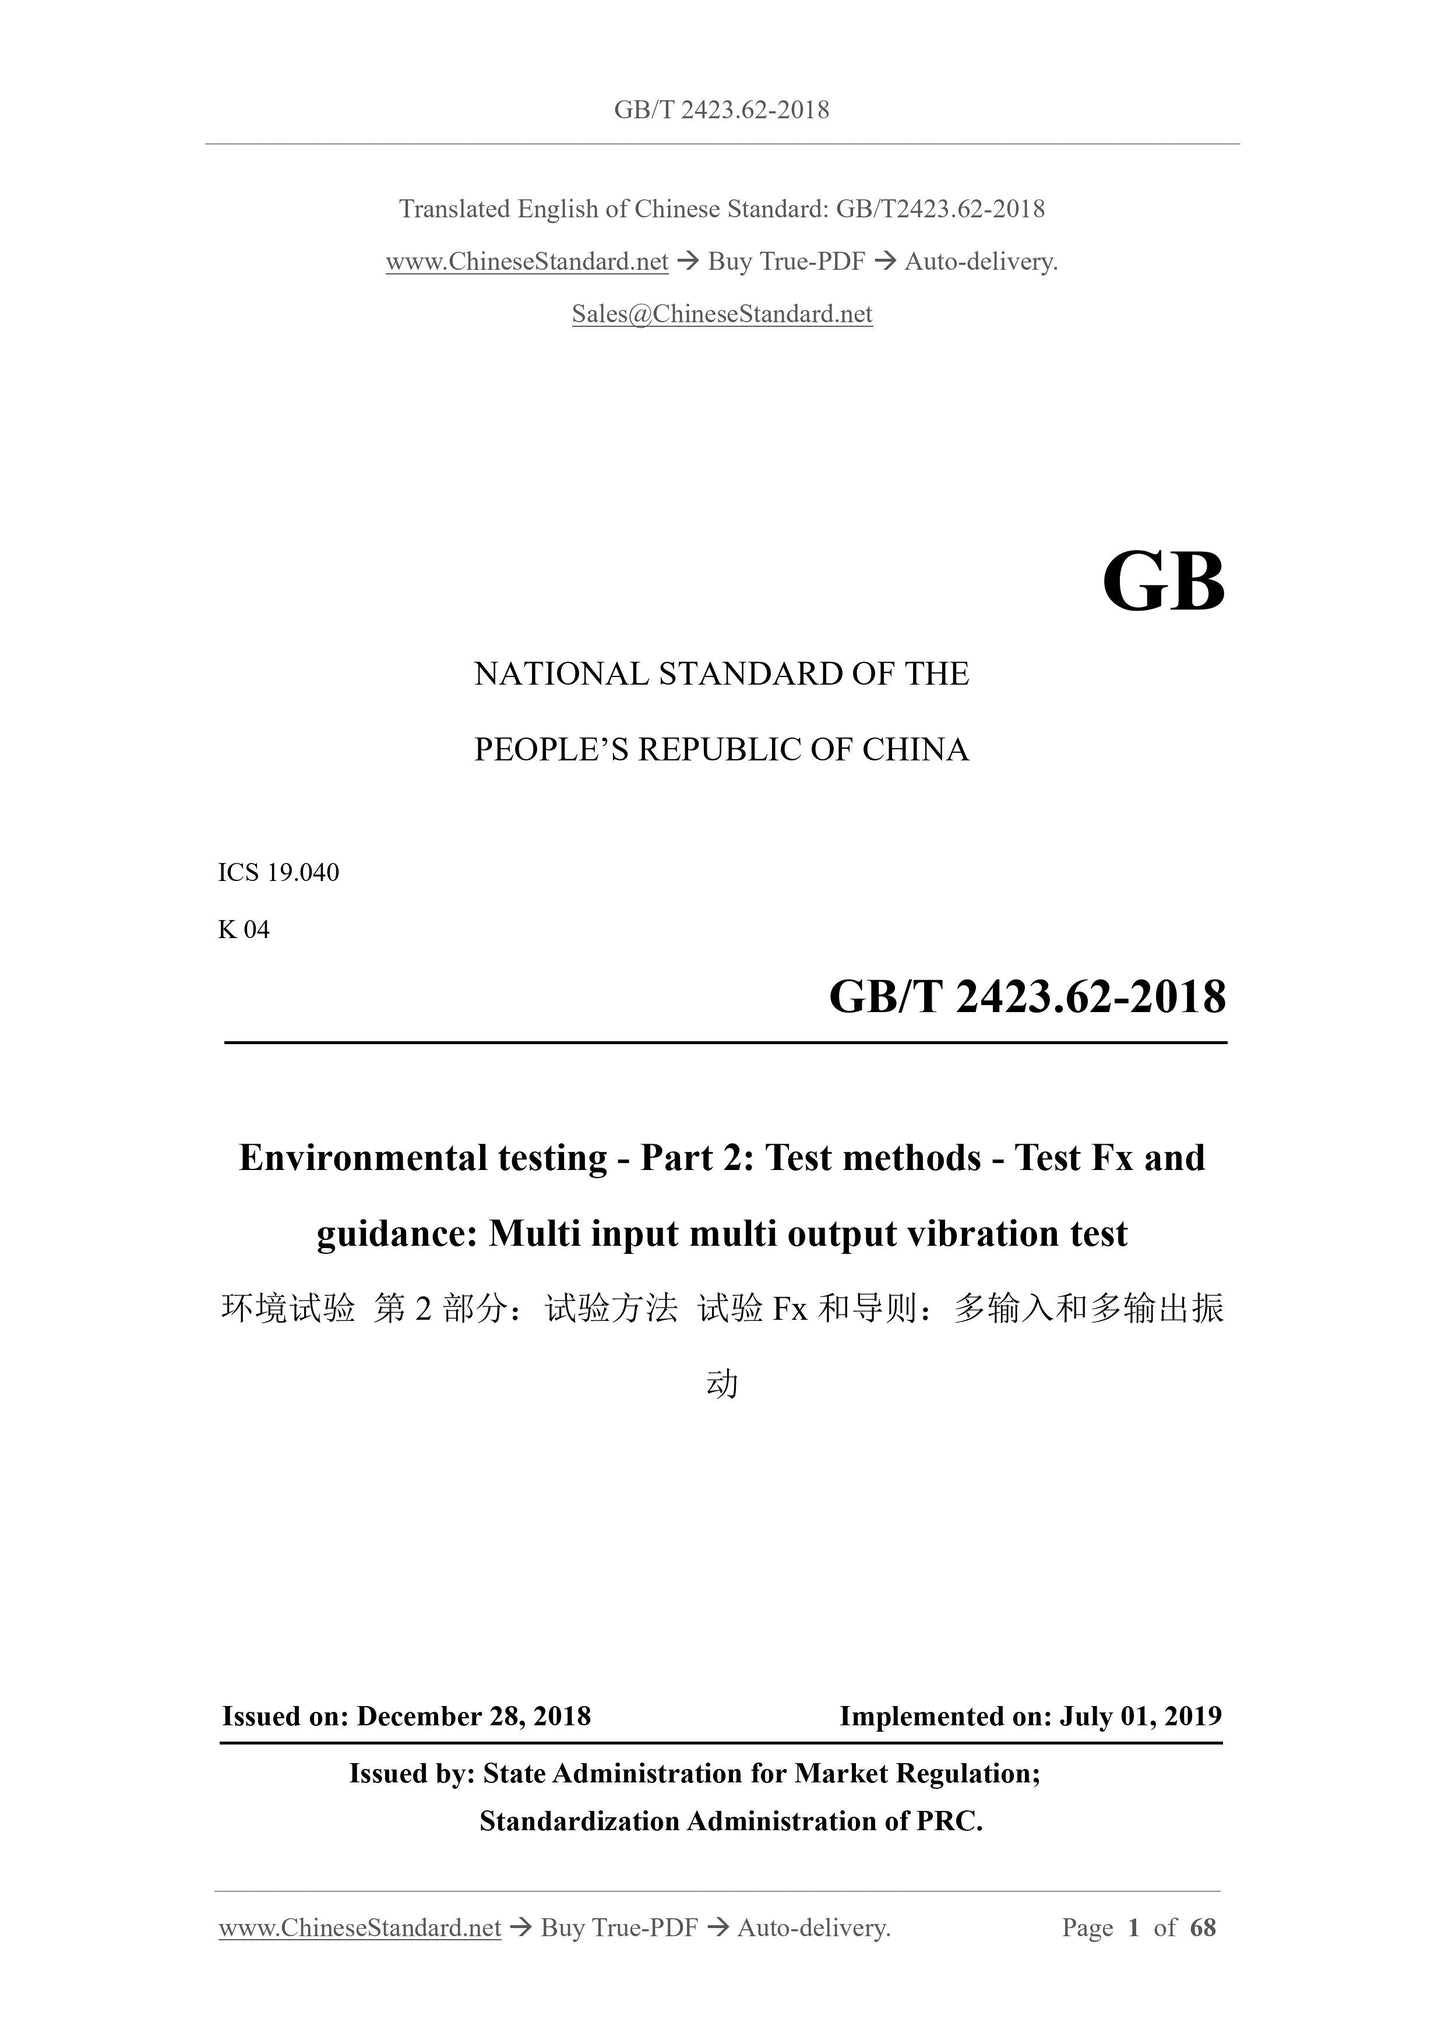 GB/T 2423.62-2018 Page 1